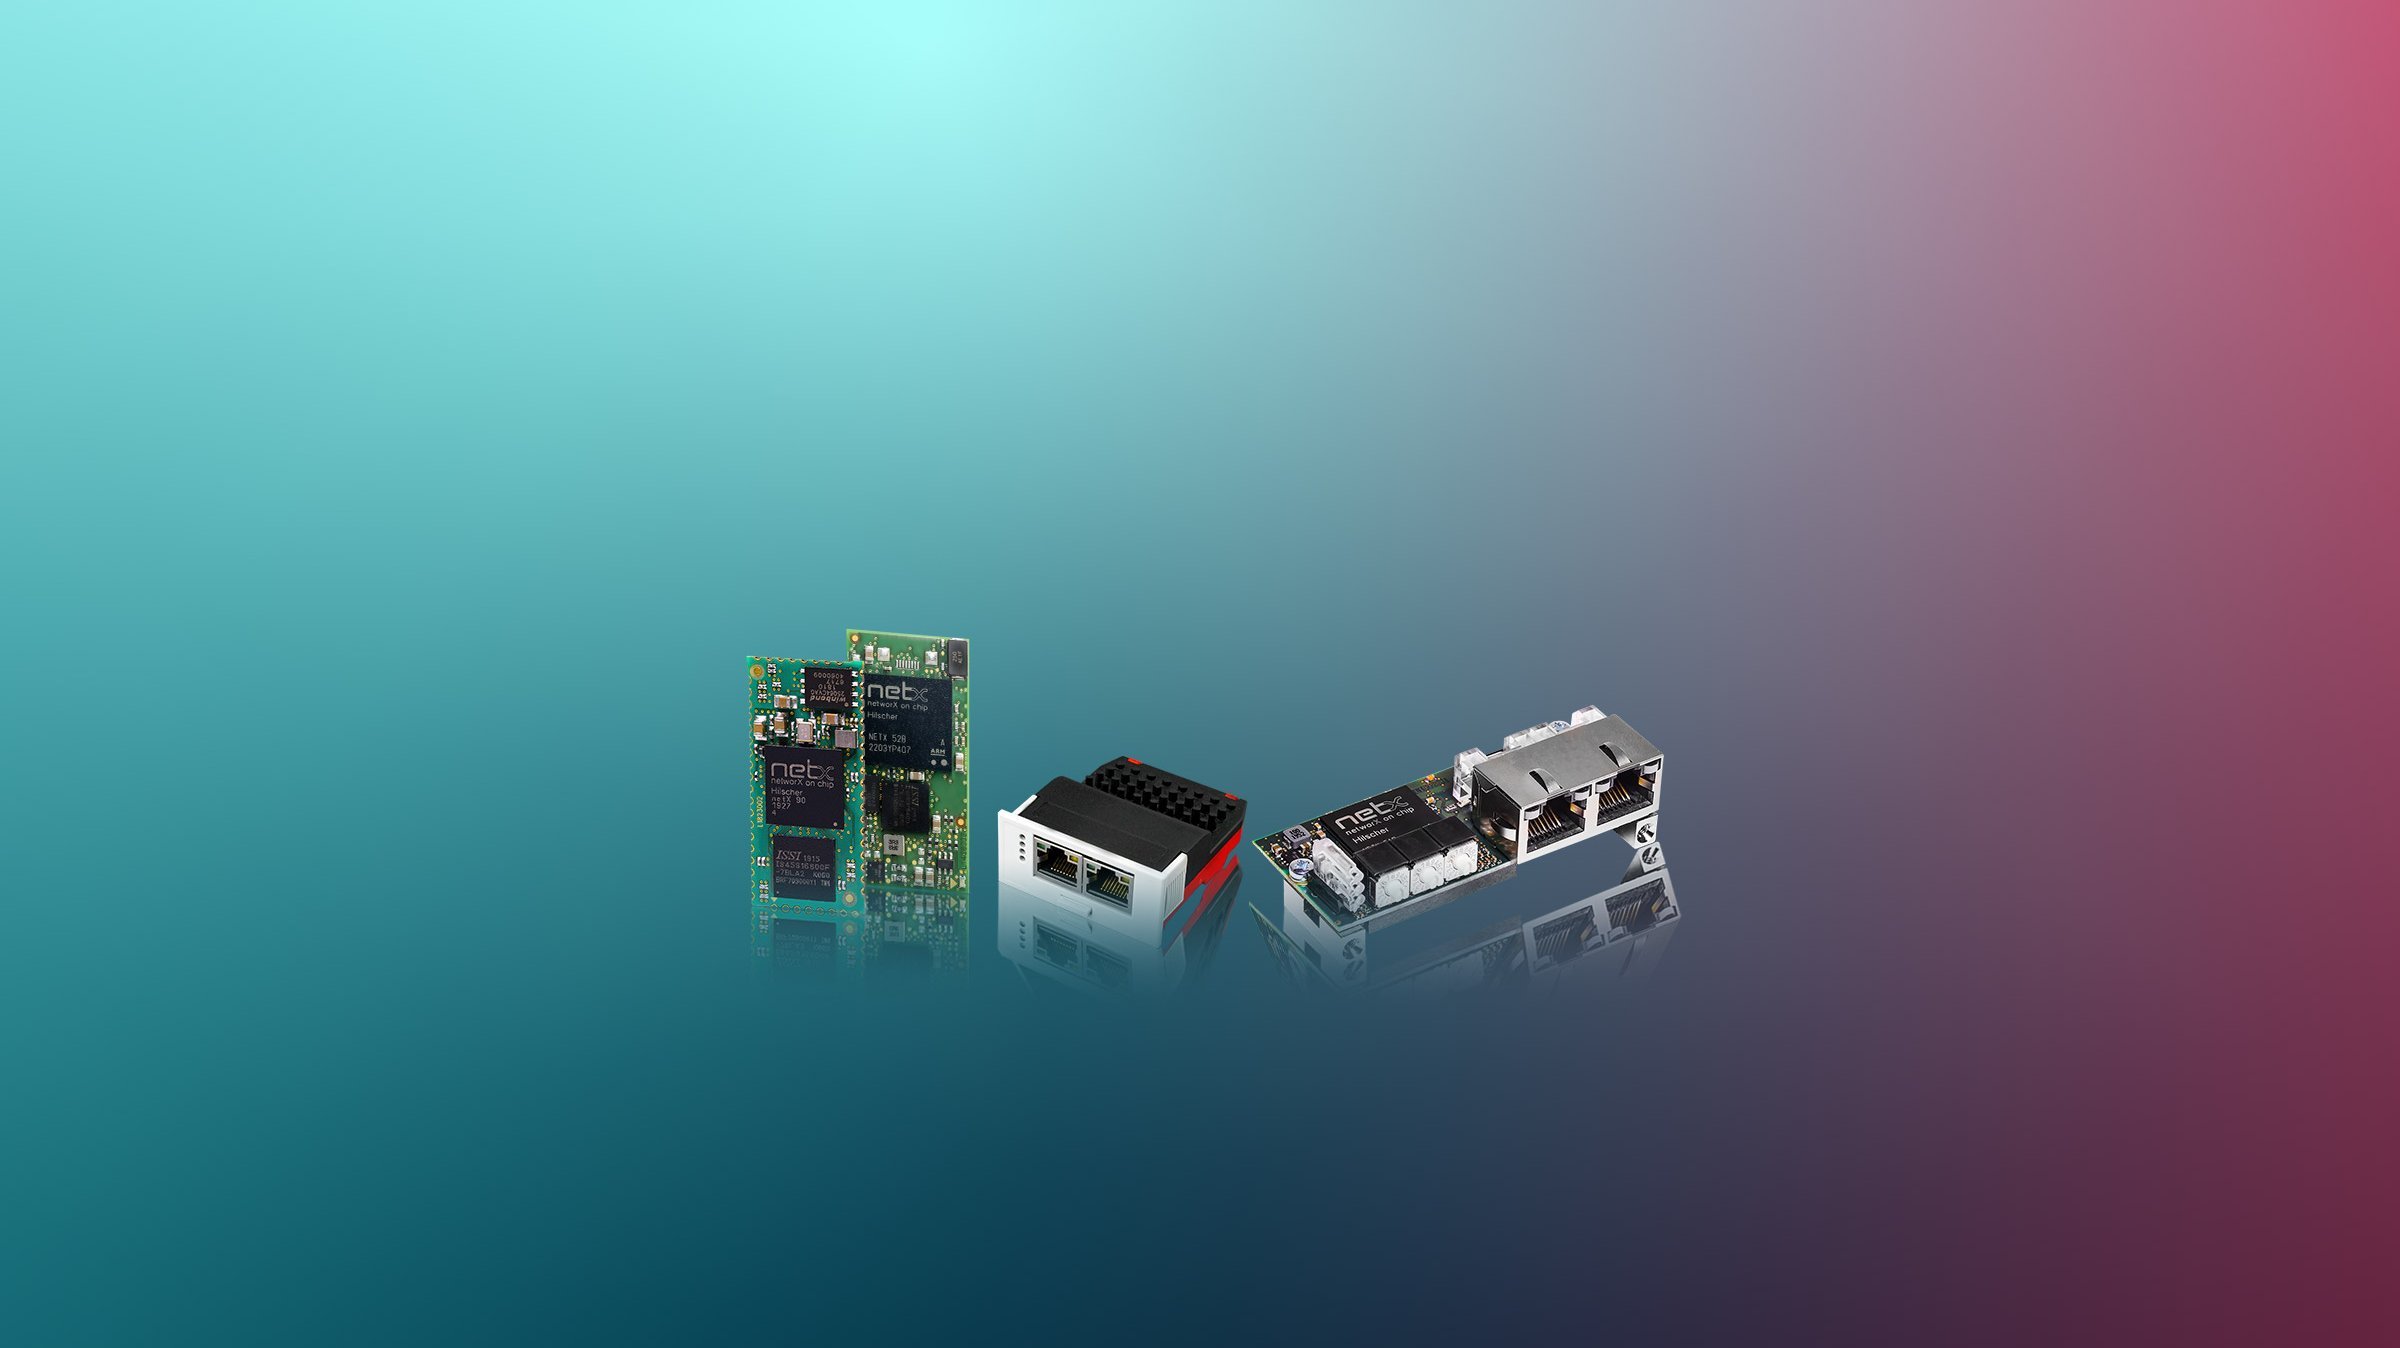 Four different embedded modules from Hilscher on a colorful background. The devices are slightly mirrored on the bottom.